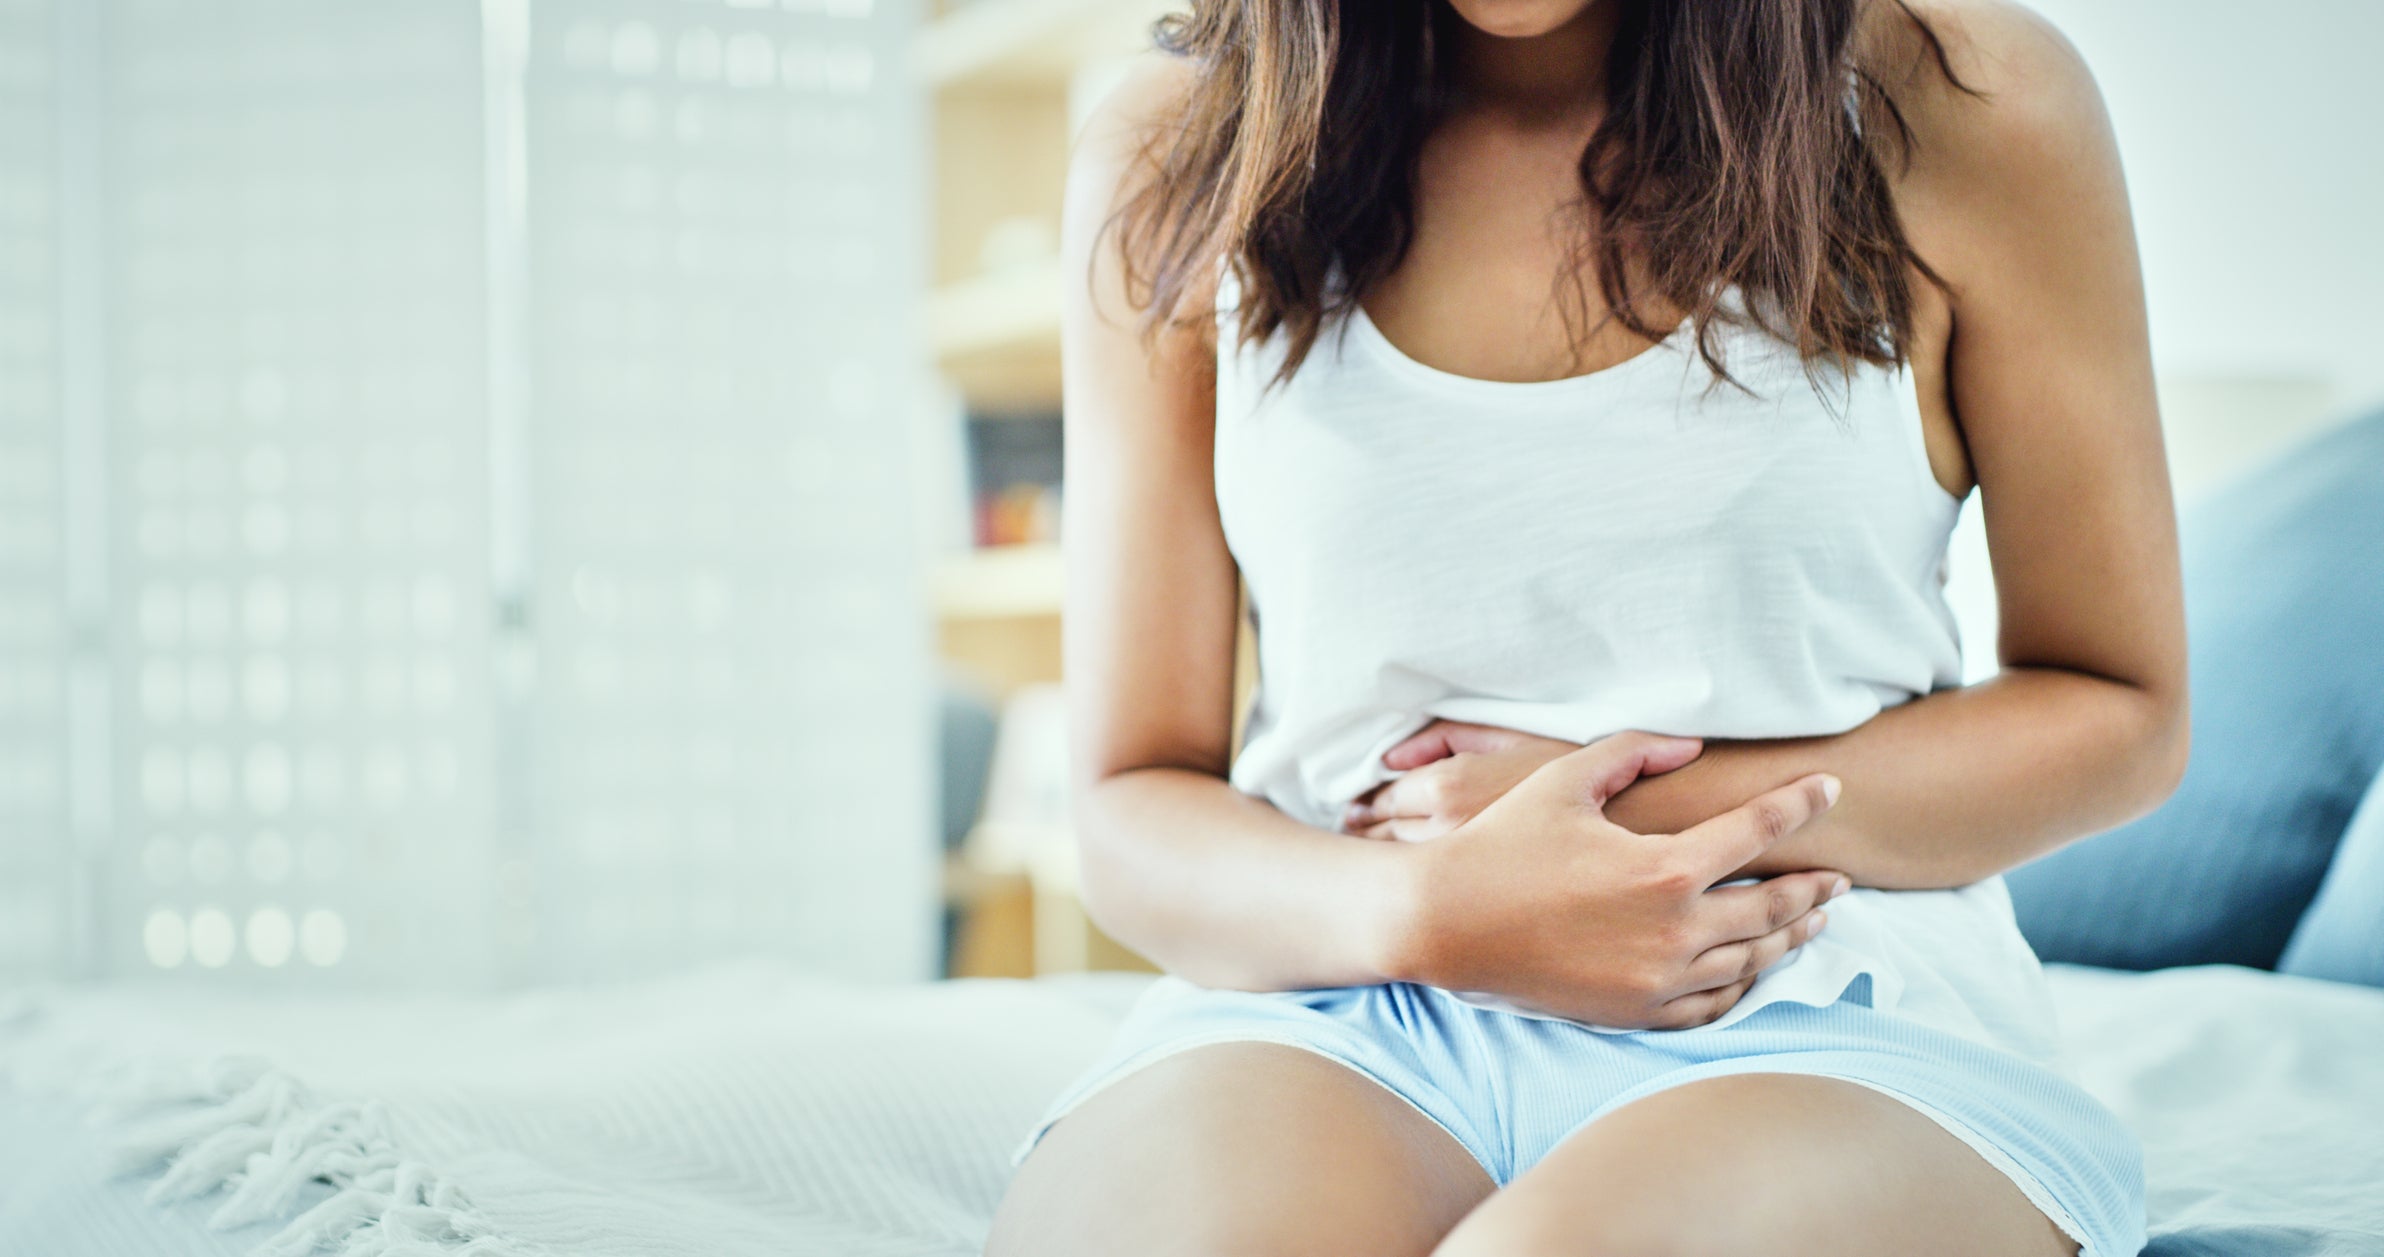 Is There a Connection Between Bloating and Pelvic Floor Health?